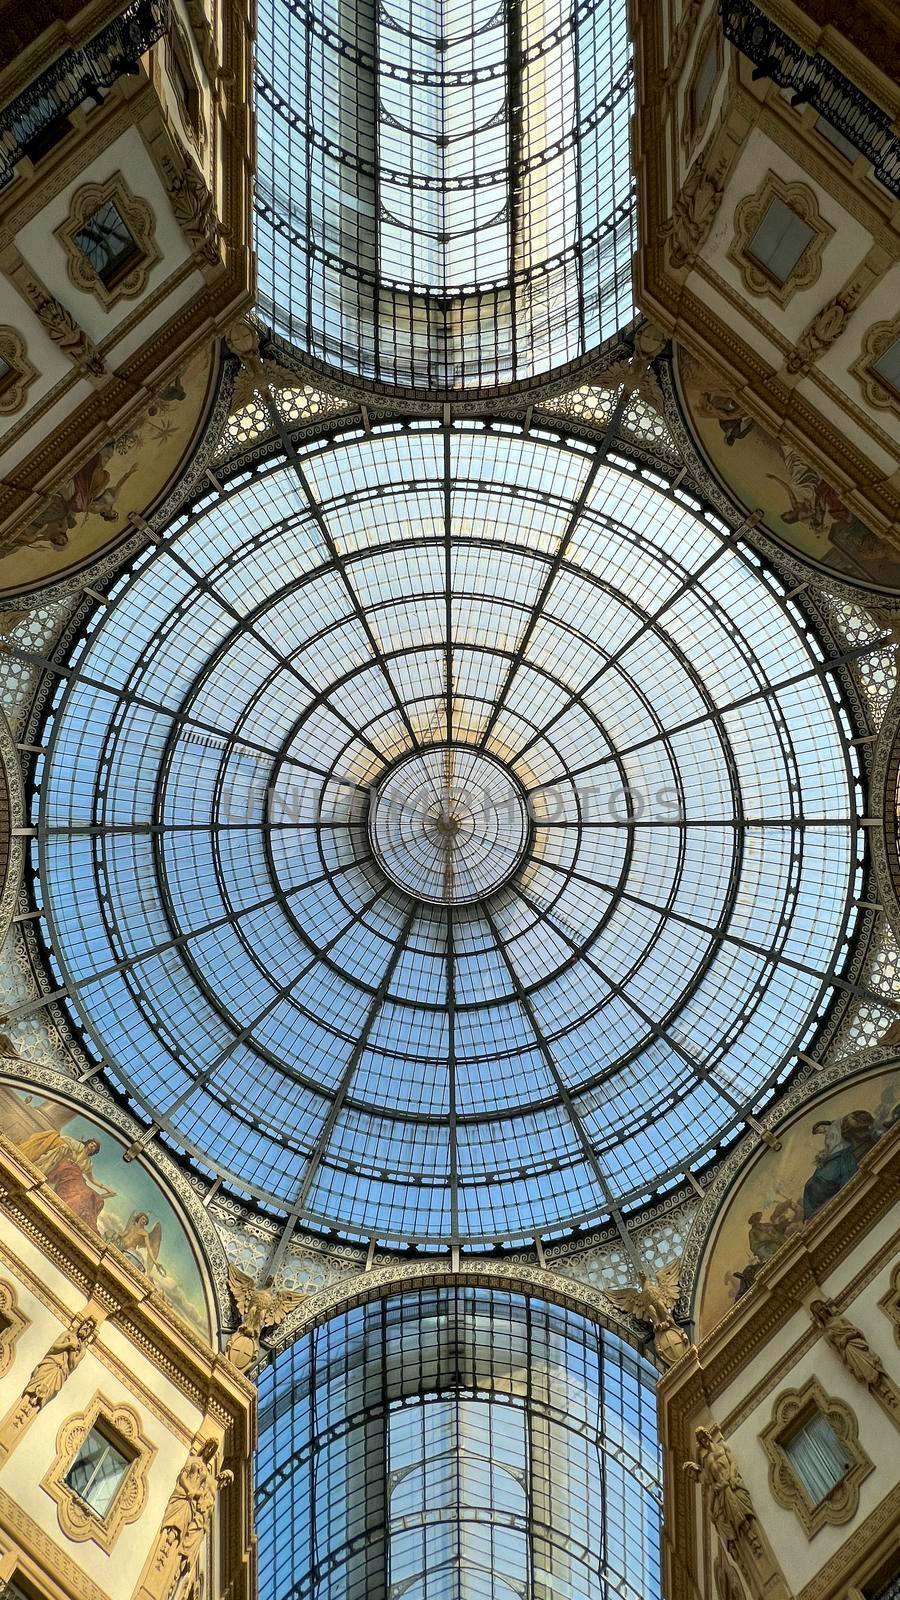 Milan glass and metal roof of the Vittorio Emanuele II gallery by tinofotografie